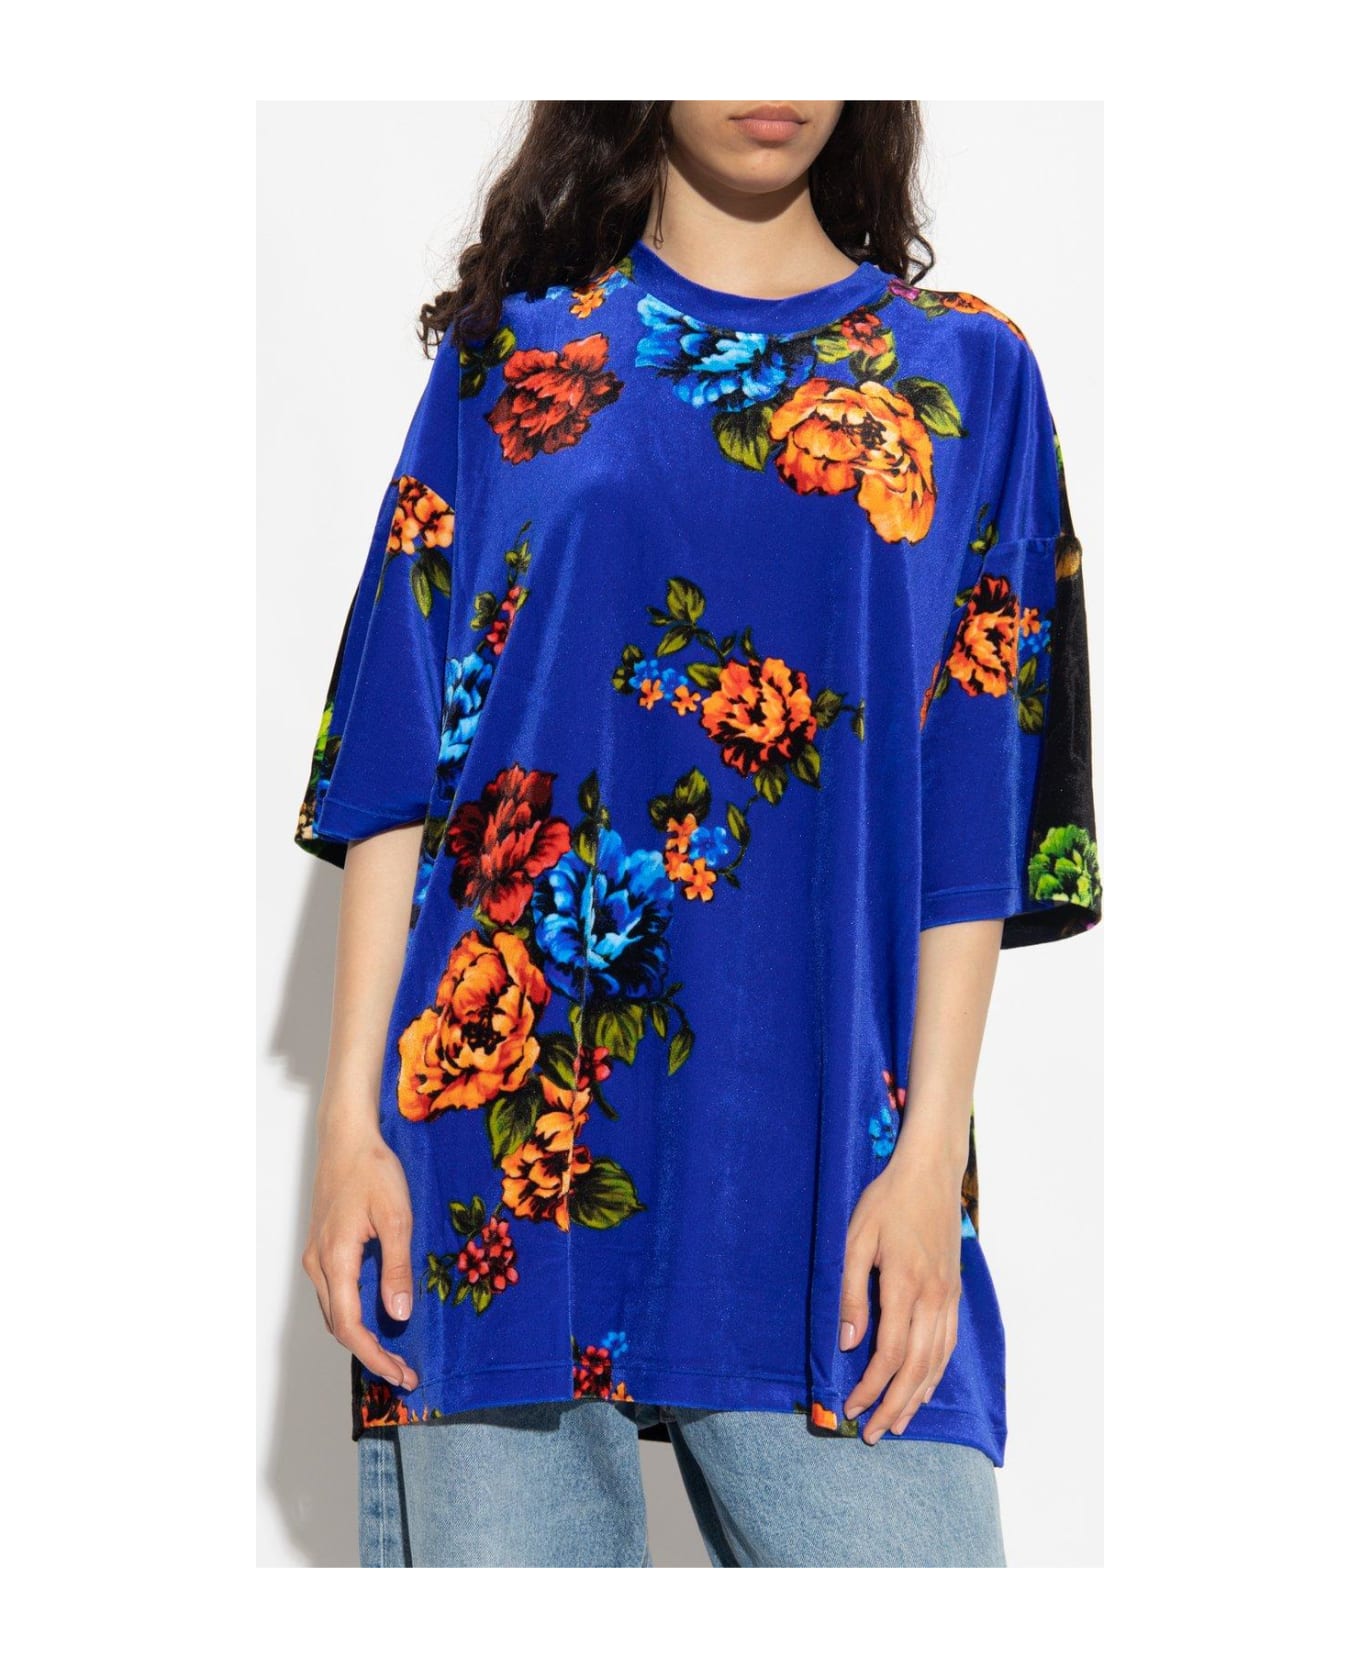 VETEMENTS Floral Printed Round-neck T-shirt - BLUE シャツ